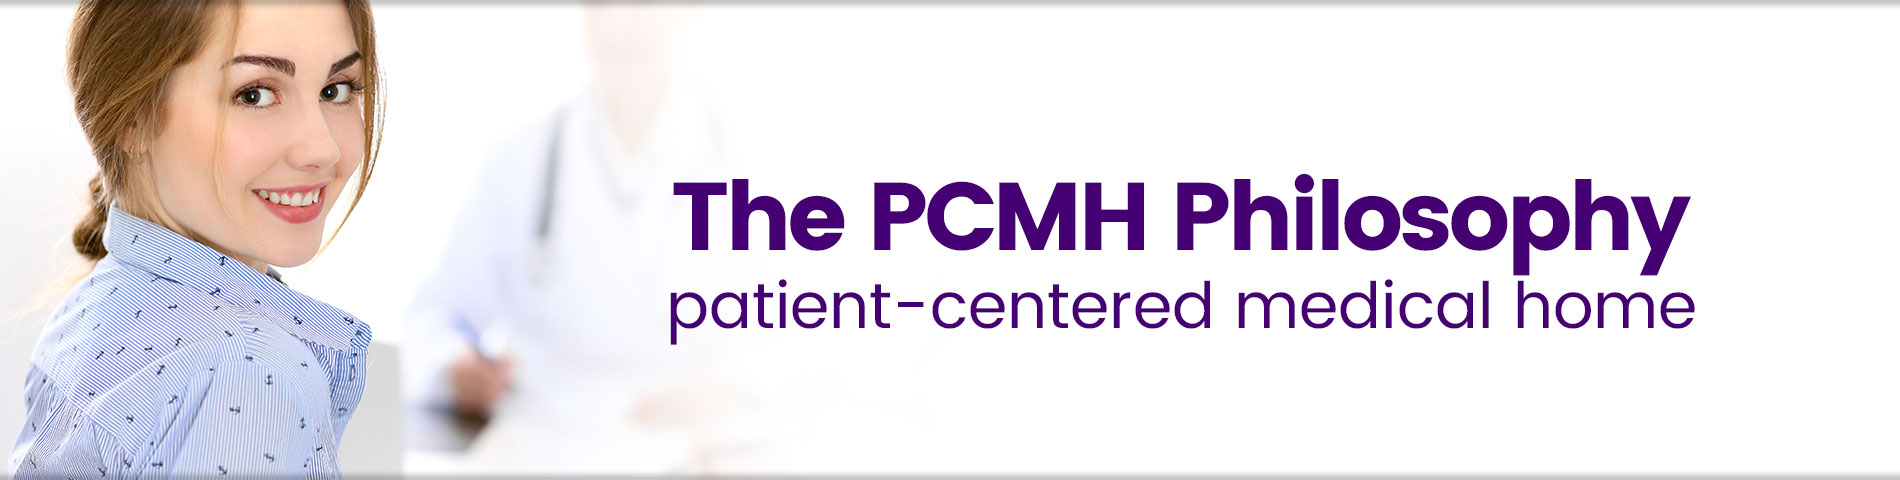 Welcome to Your Patient-Centered Medical Home